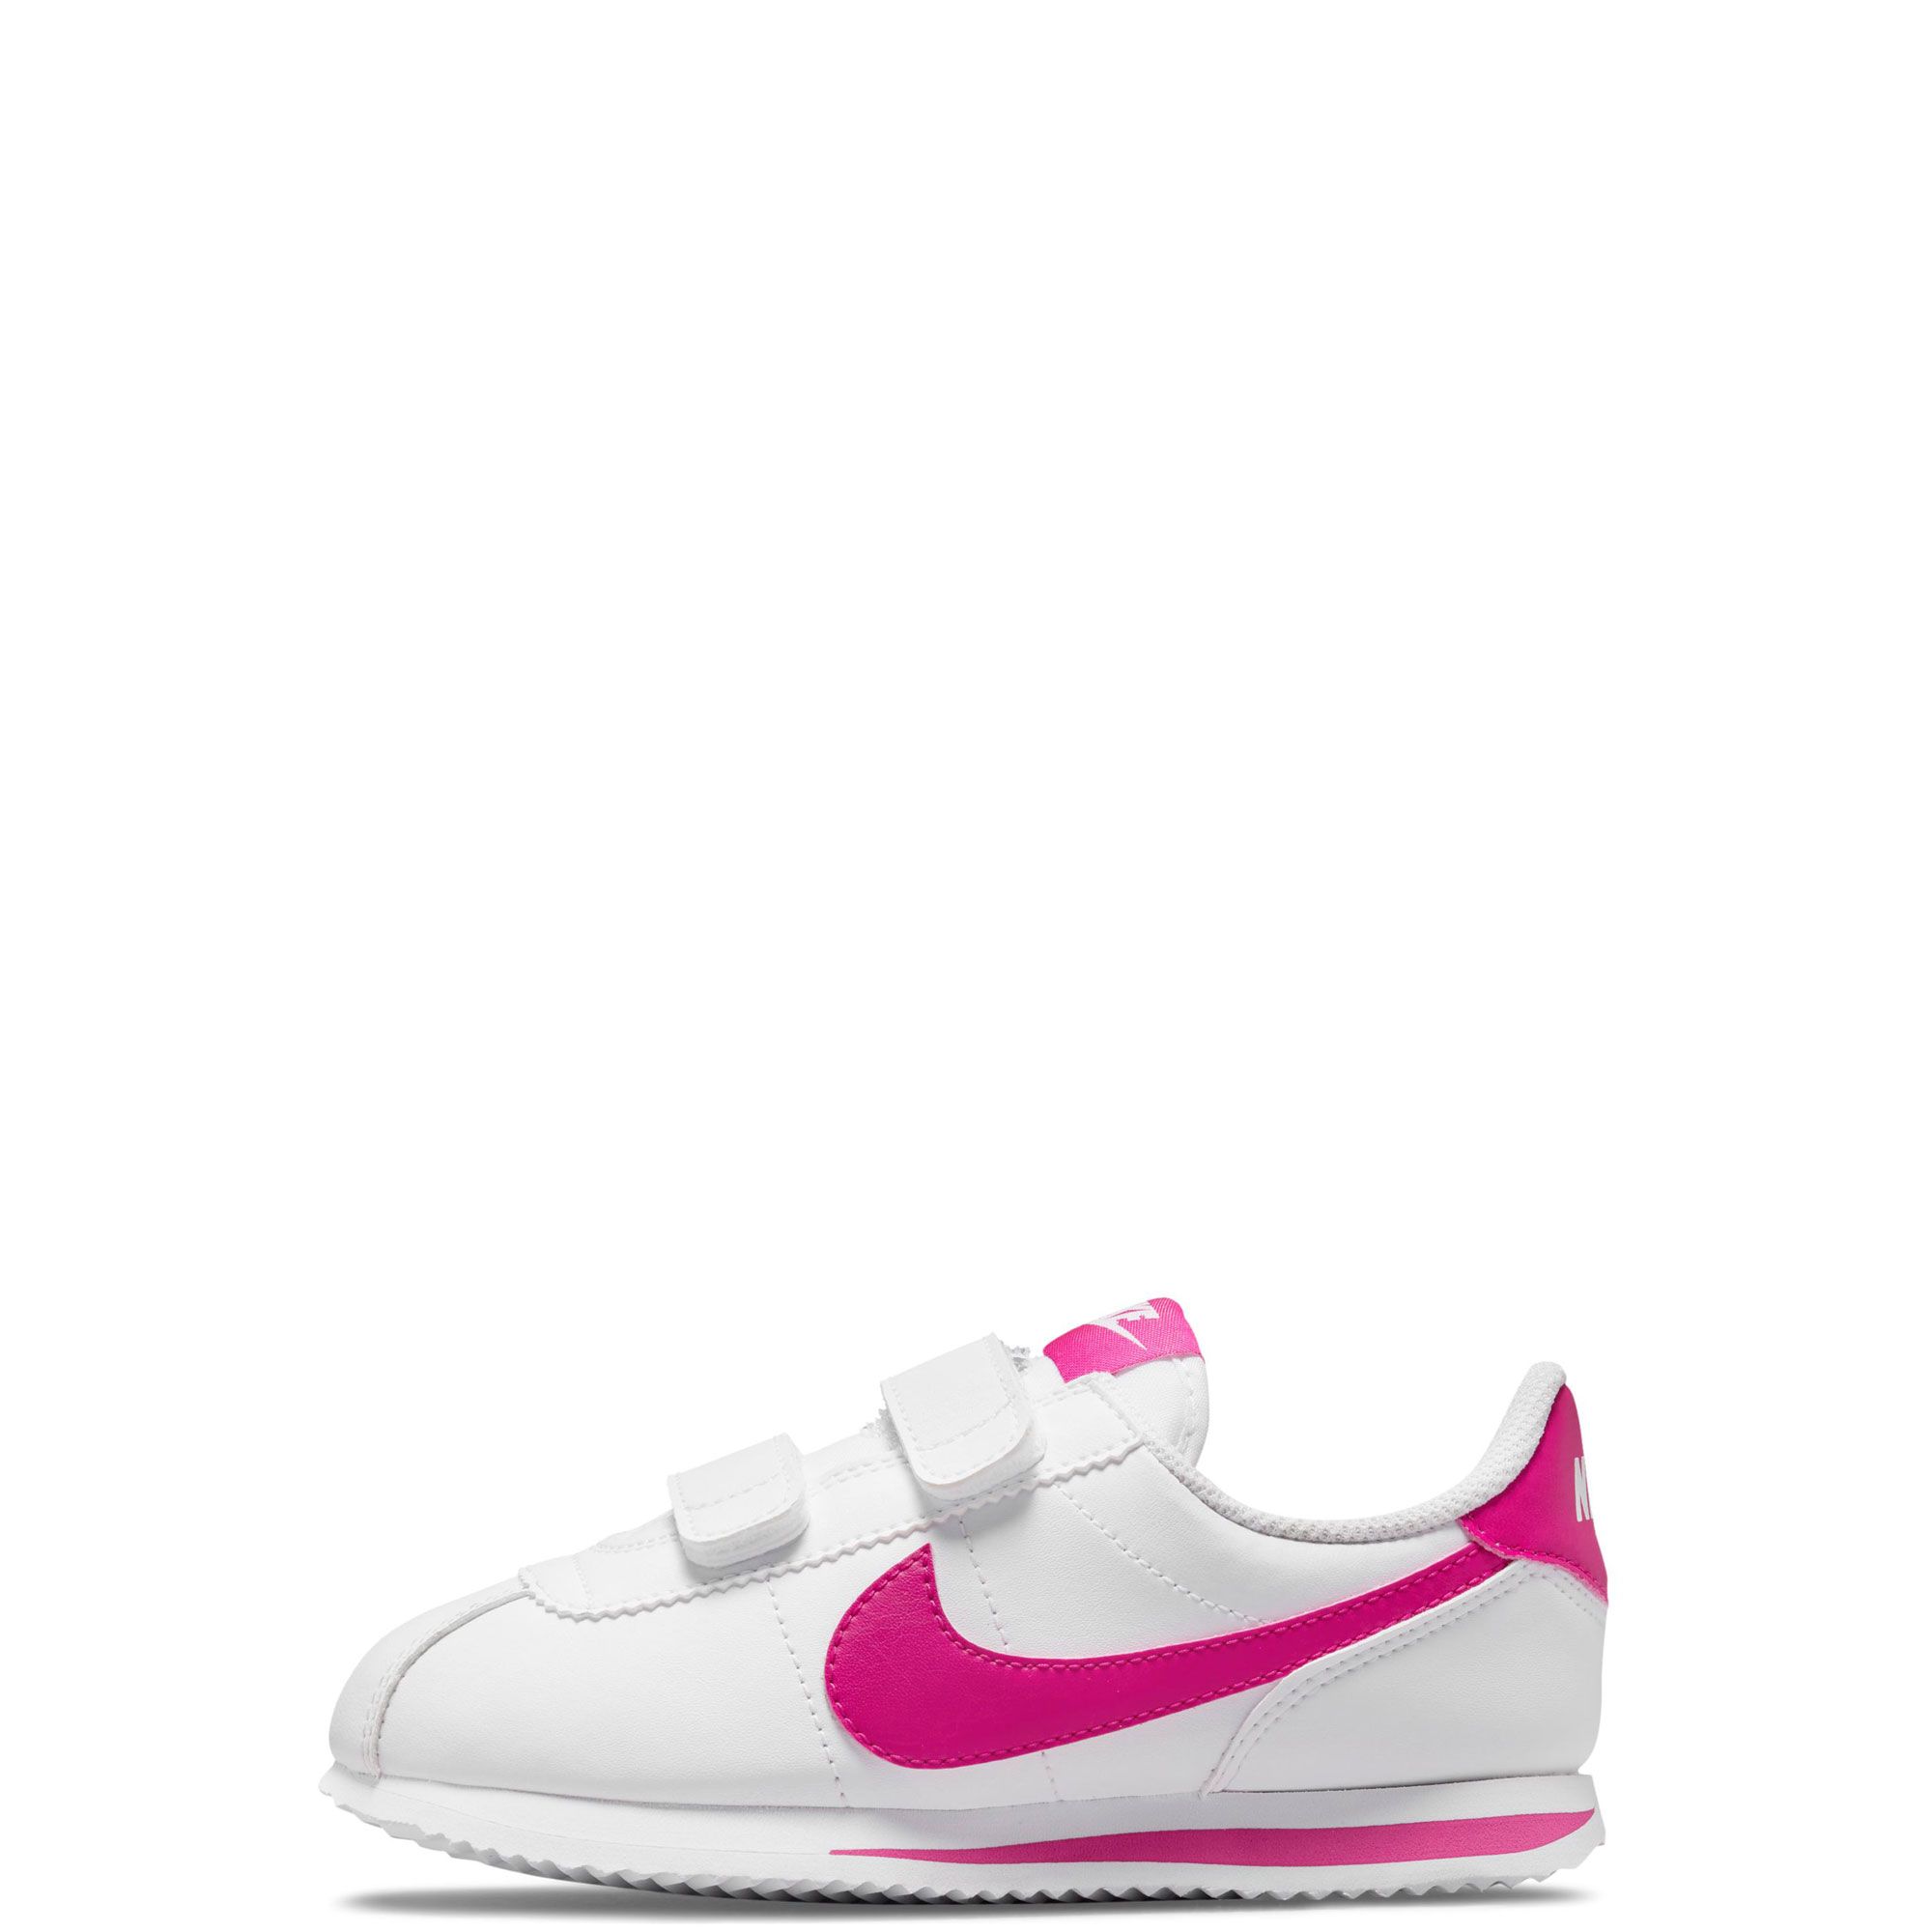 Nike Cortez Pink and Black Size 6.5